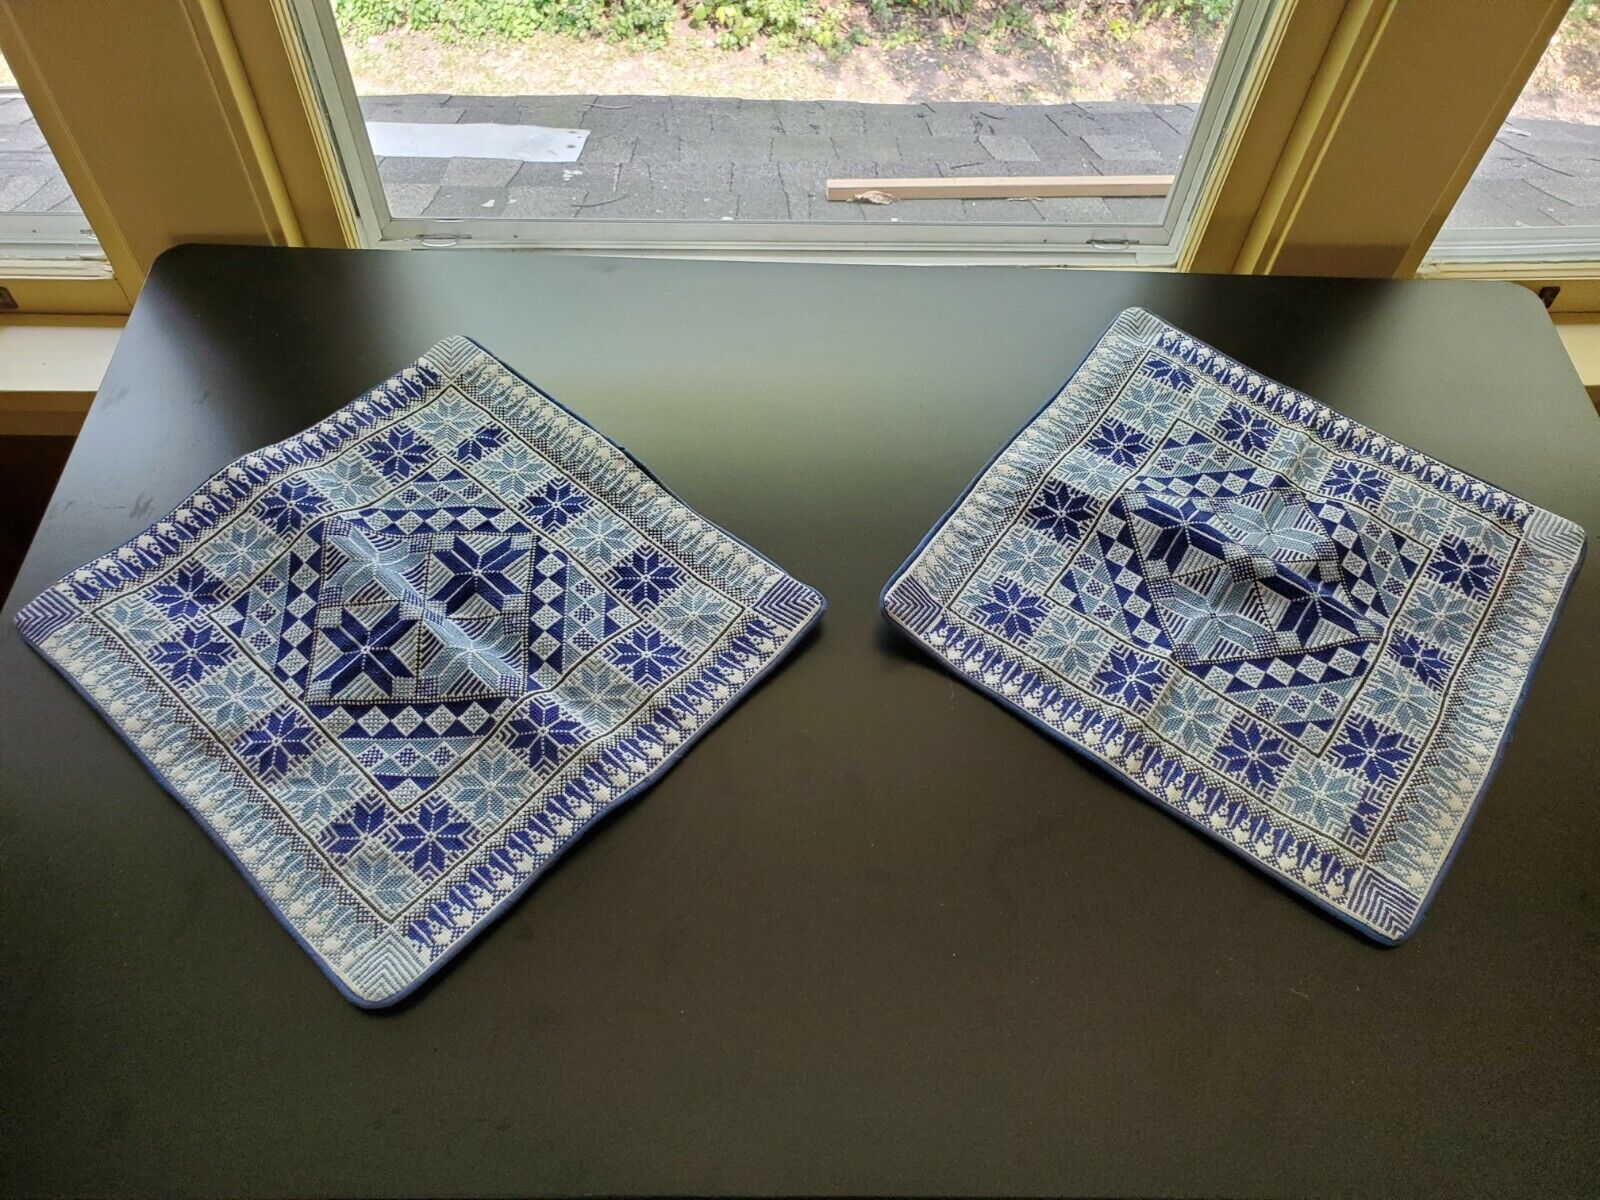 2 Pillow Cases with Intricate Design New Blue and White Colors in Diamond Shape